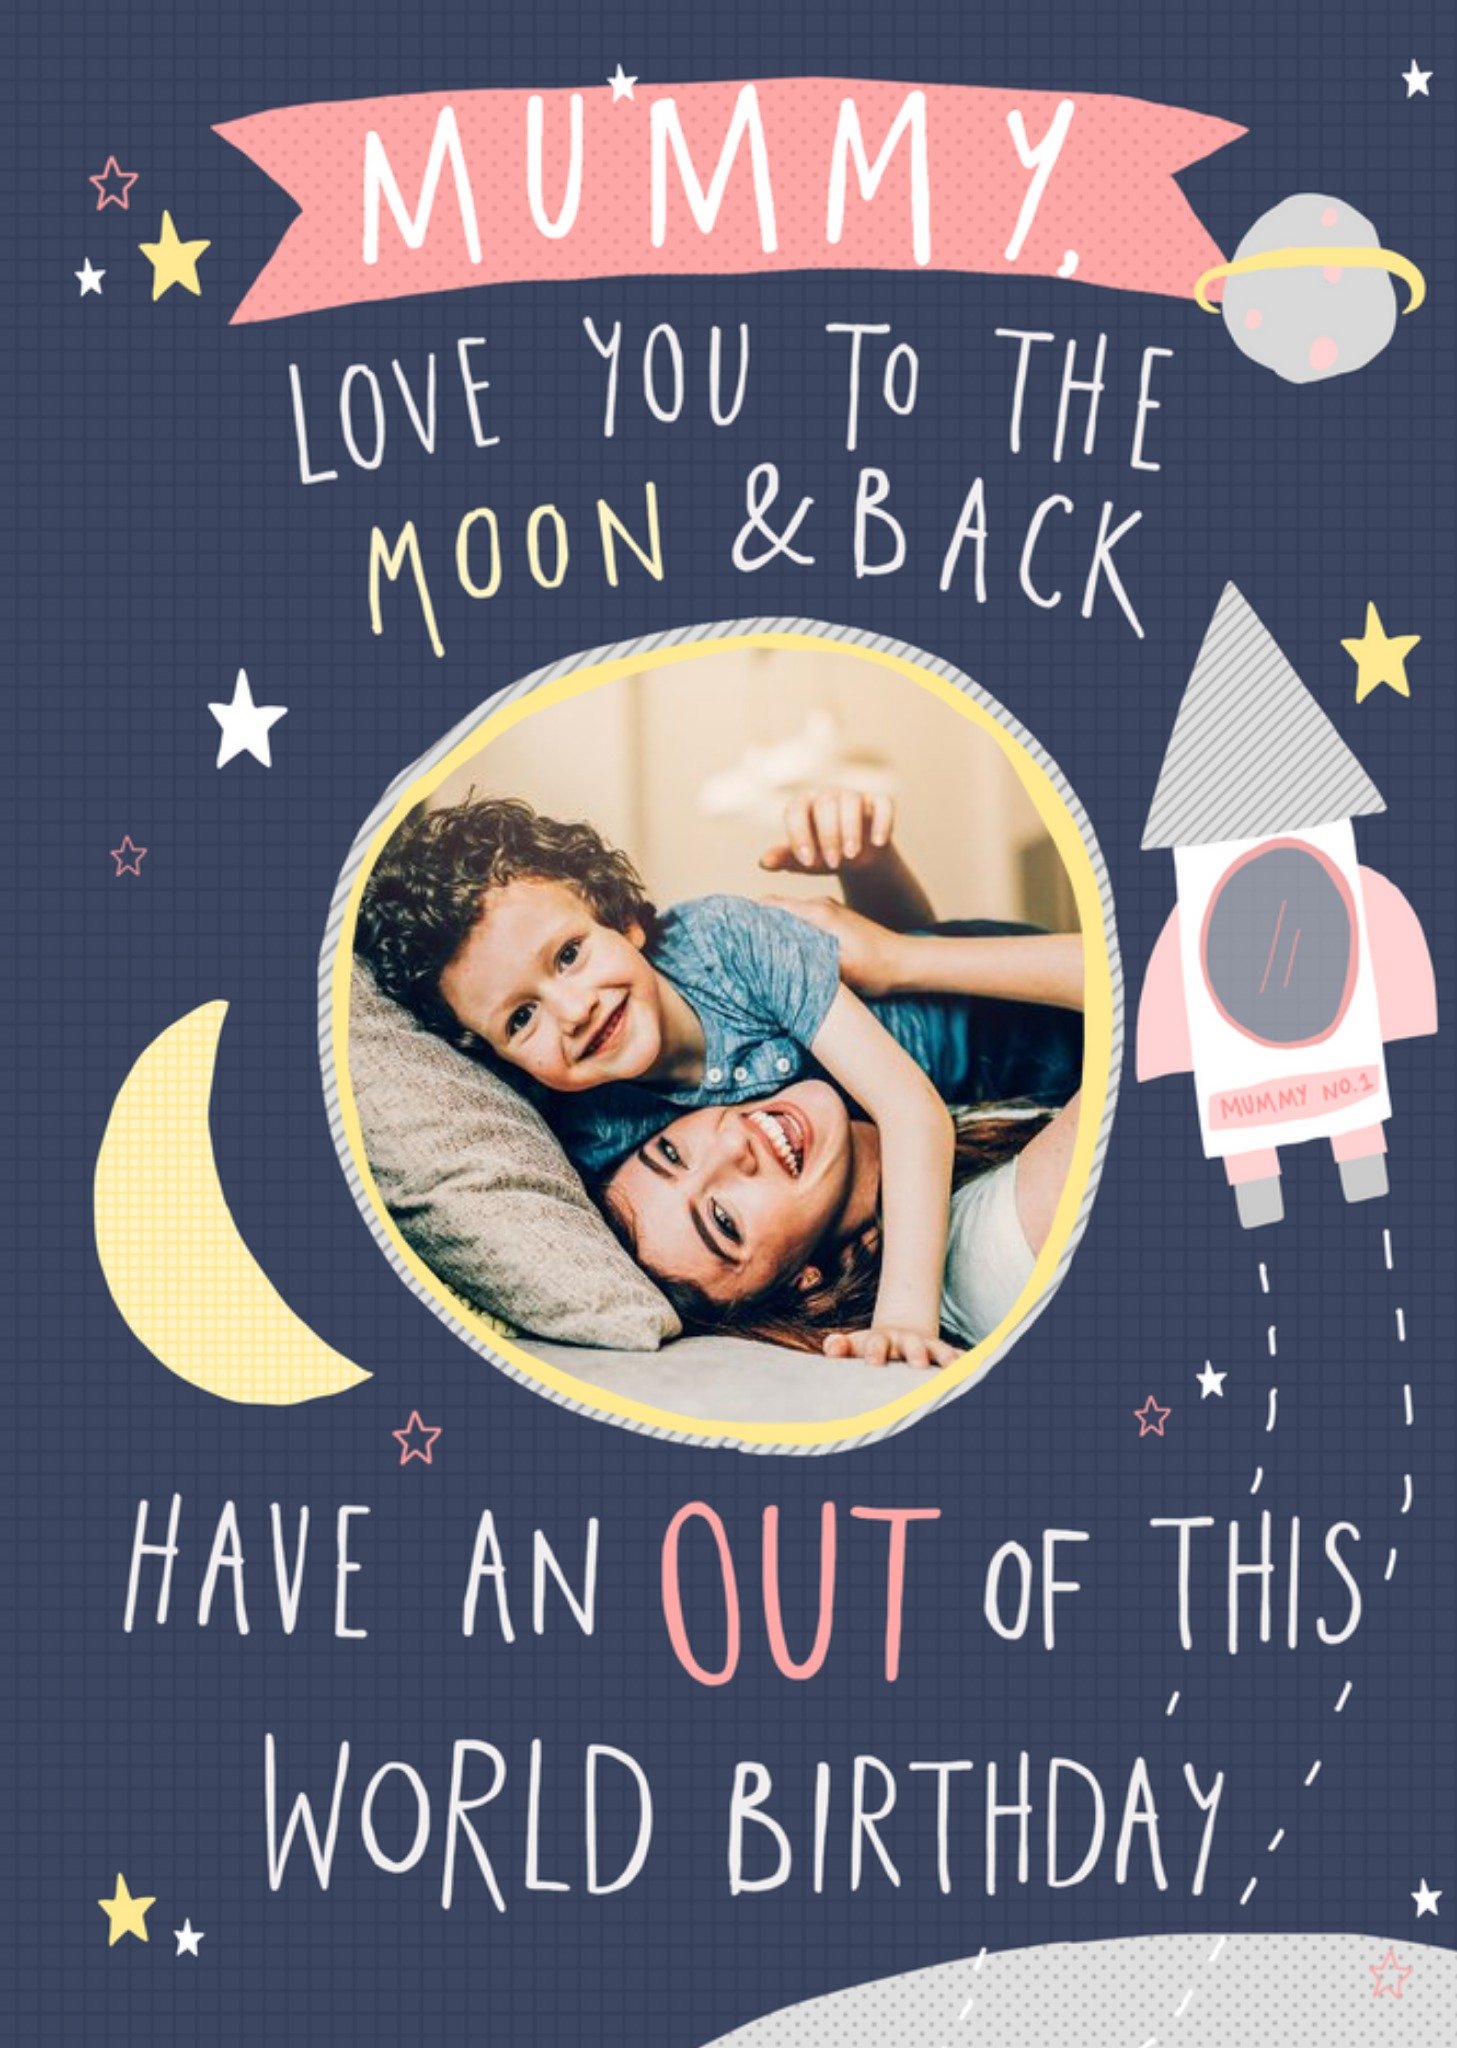 Moonpig Birthday Card - Mummy - Moon And Back - Out Of This World - Photo Upload Card Ecard